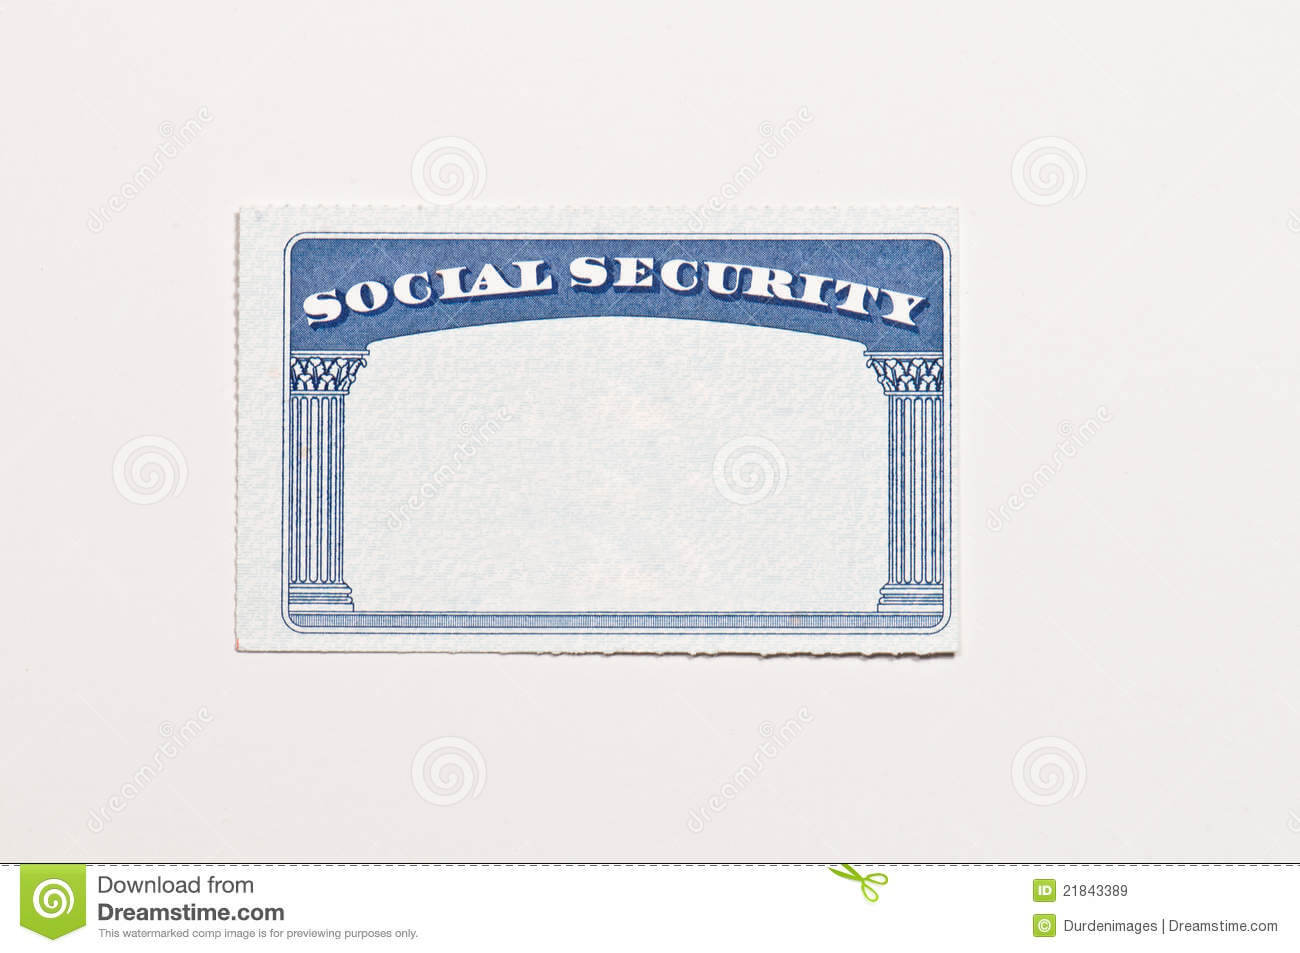 Blank Social Security Card Stock Image. Image Of Document For Blank Social Security Card Template Download